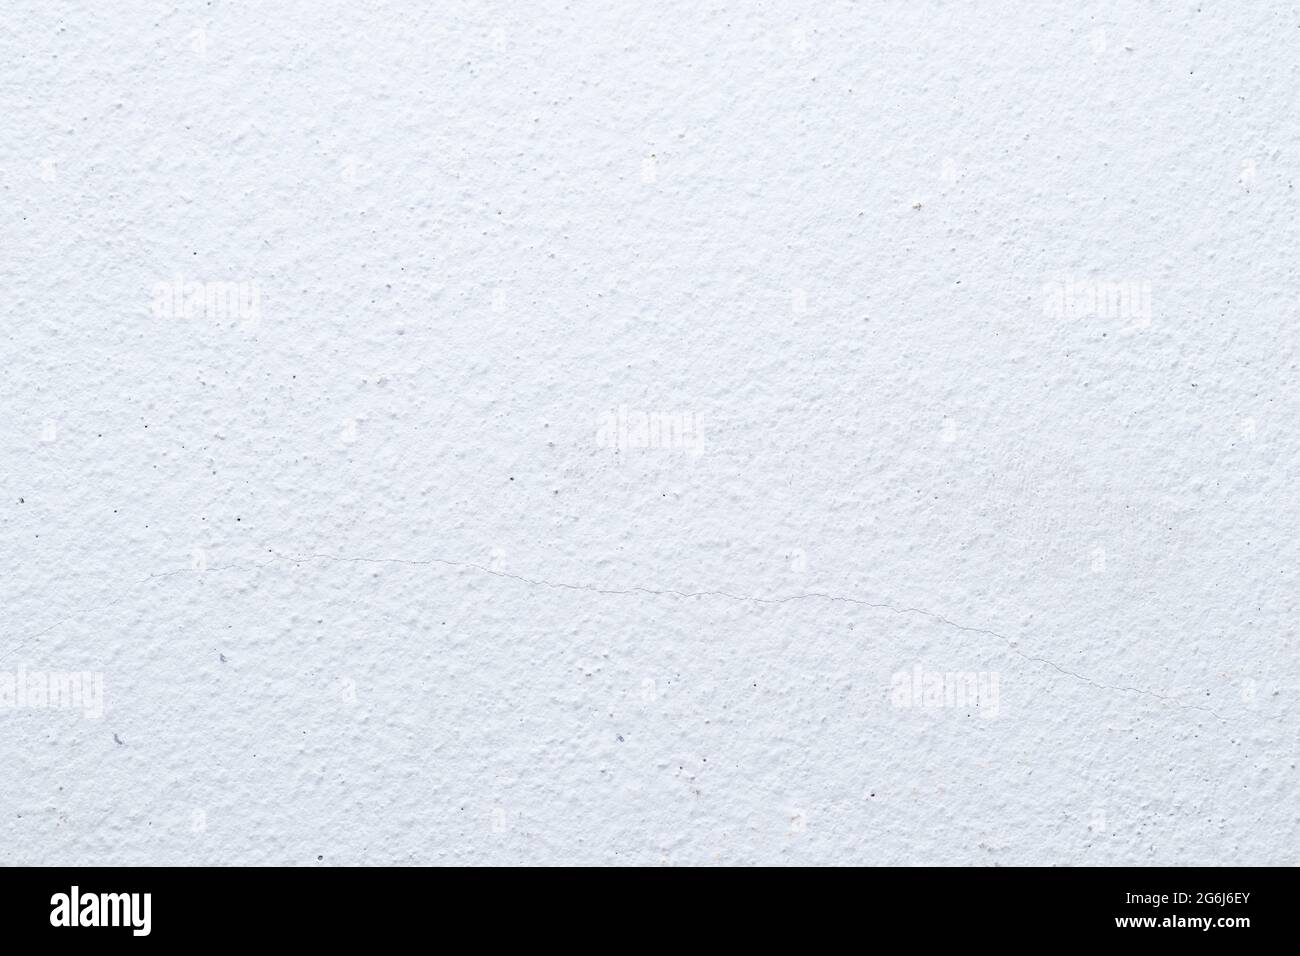 Blank concrete white rough wall for background. Beautiful white cement wall plastered surface background pattern. Stock Photo